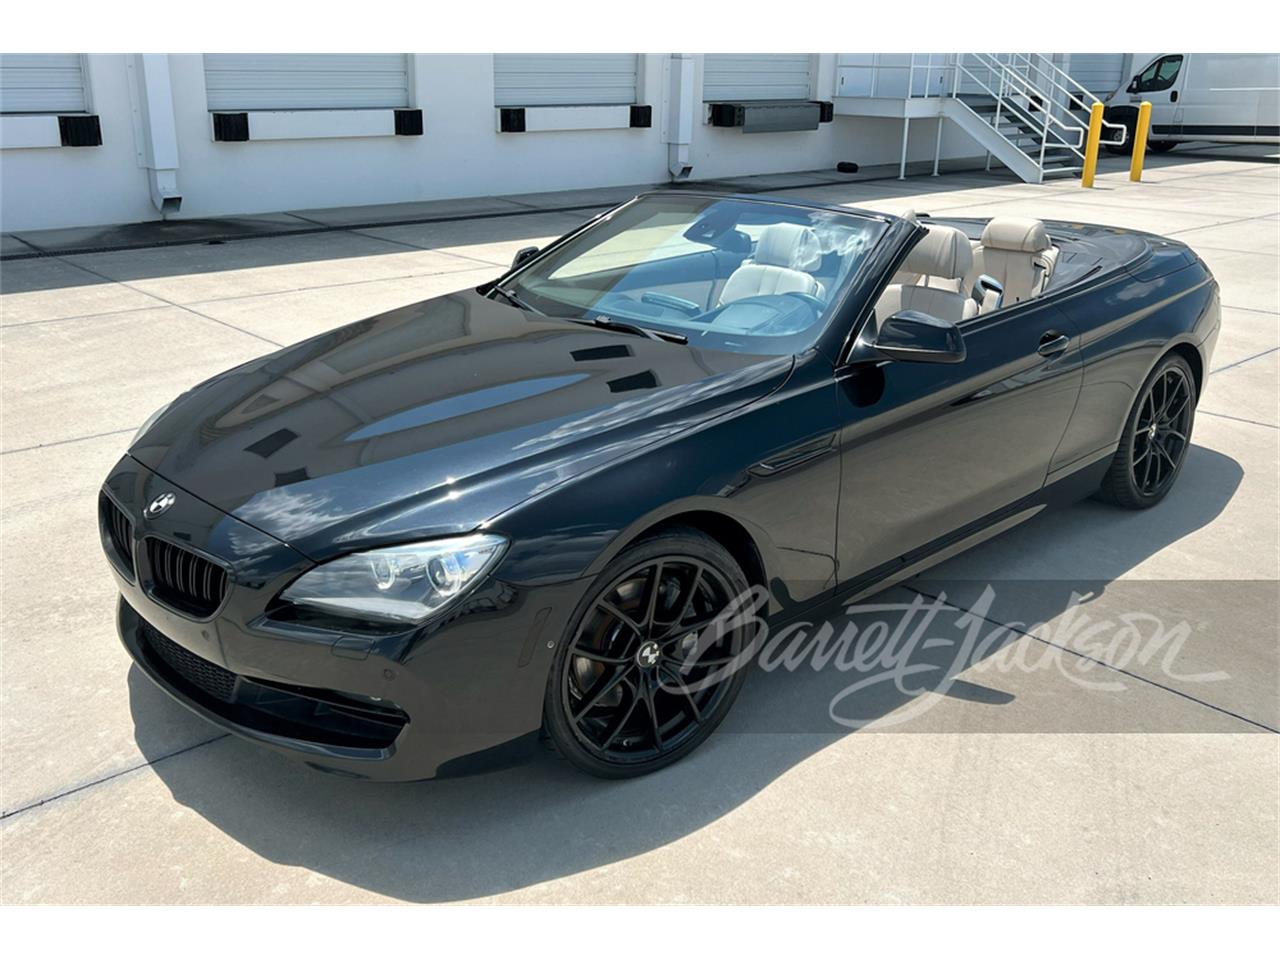 For Sale at Auction: 2012 BMW 650I in Scottsdale, Arizona for sale in Scottsdale, AZ